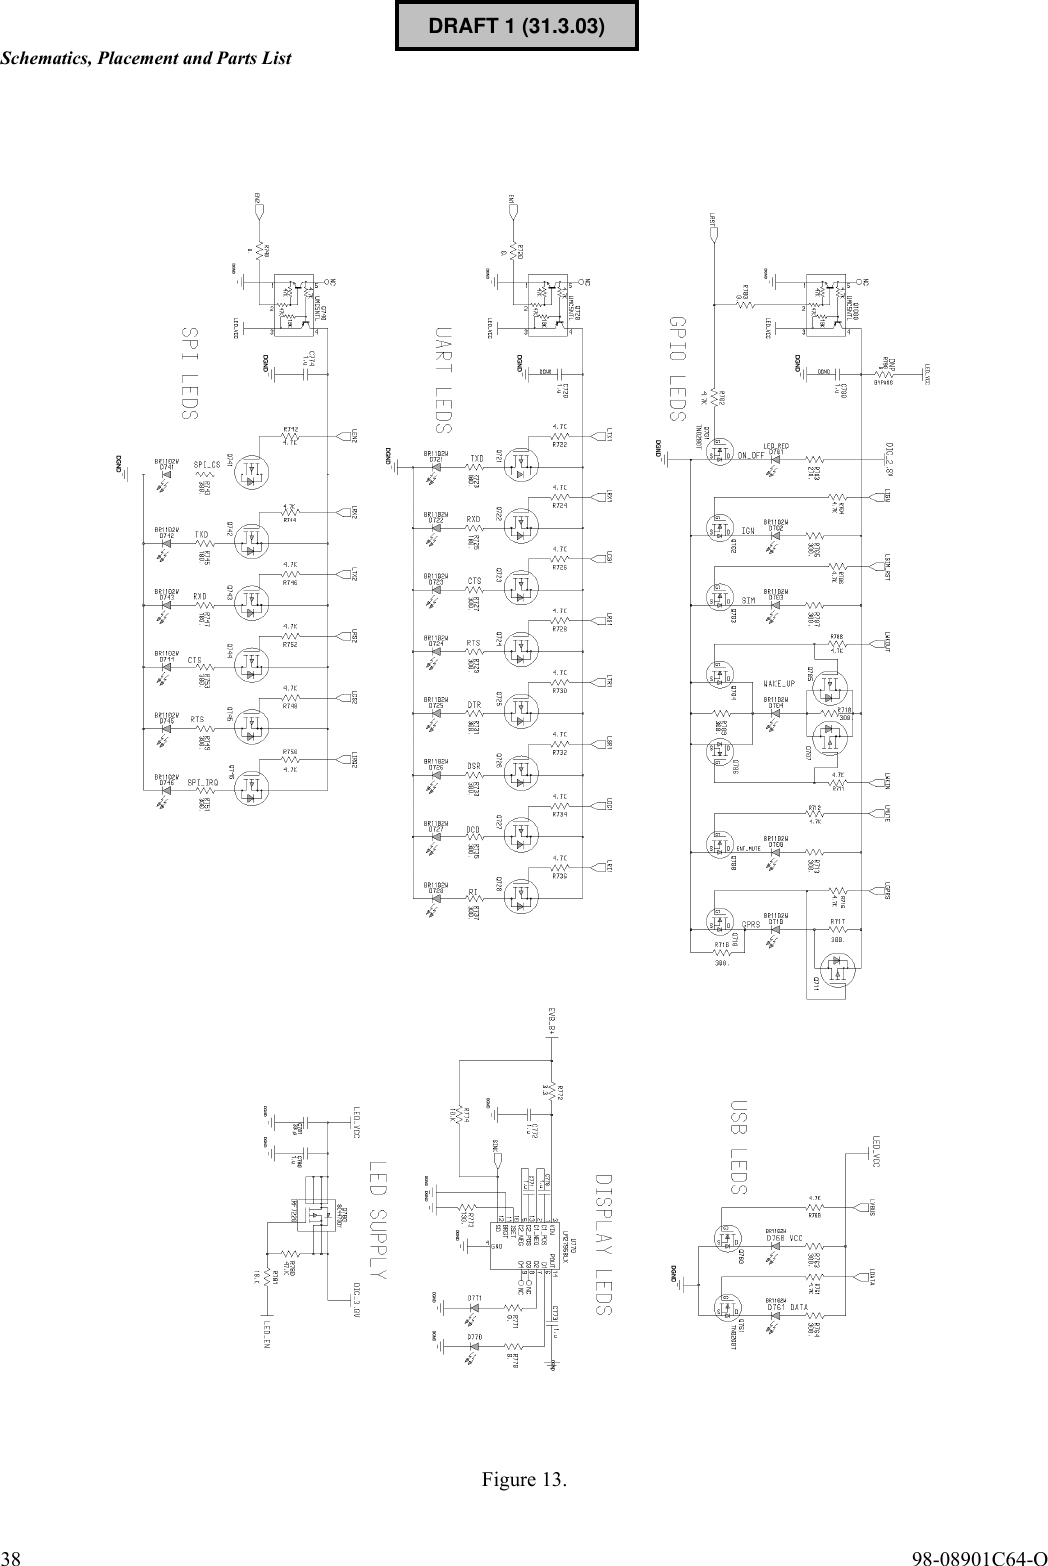 Schematics, Placement and Parts List38  98-08901C64-OFigure 13.DRAFT 1 (31.3.03)